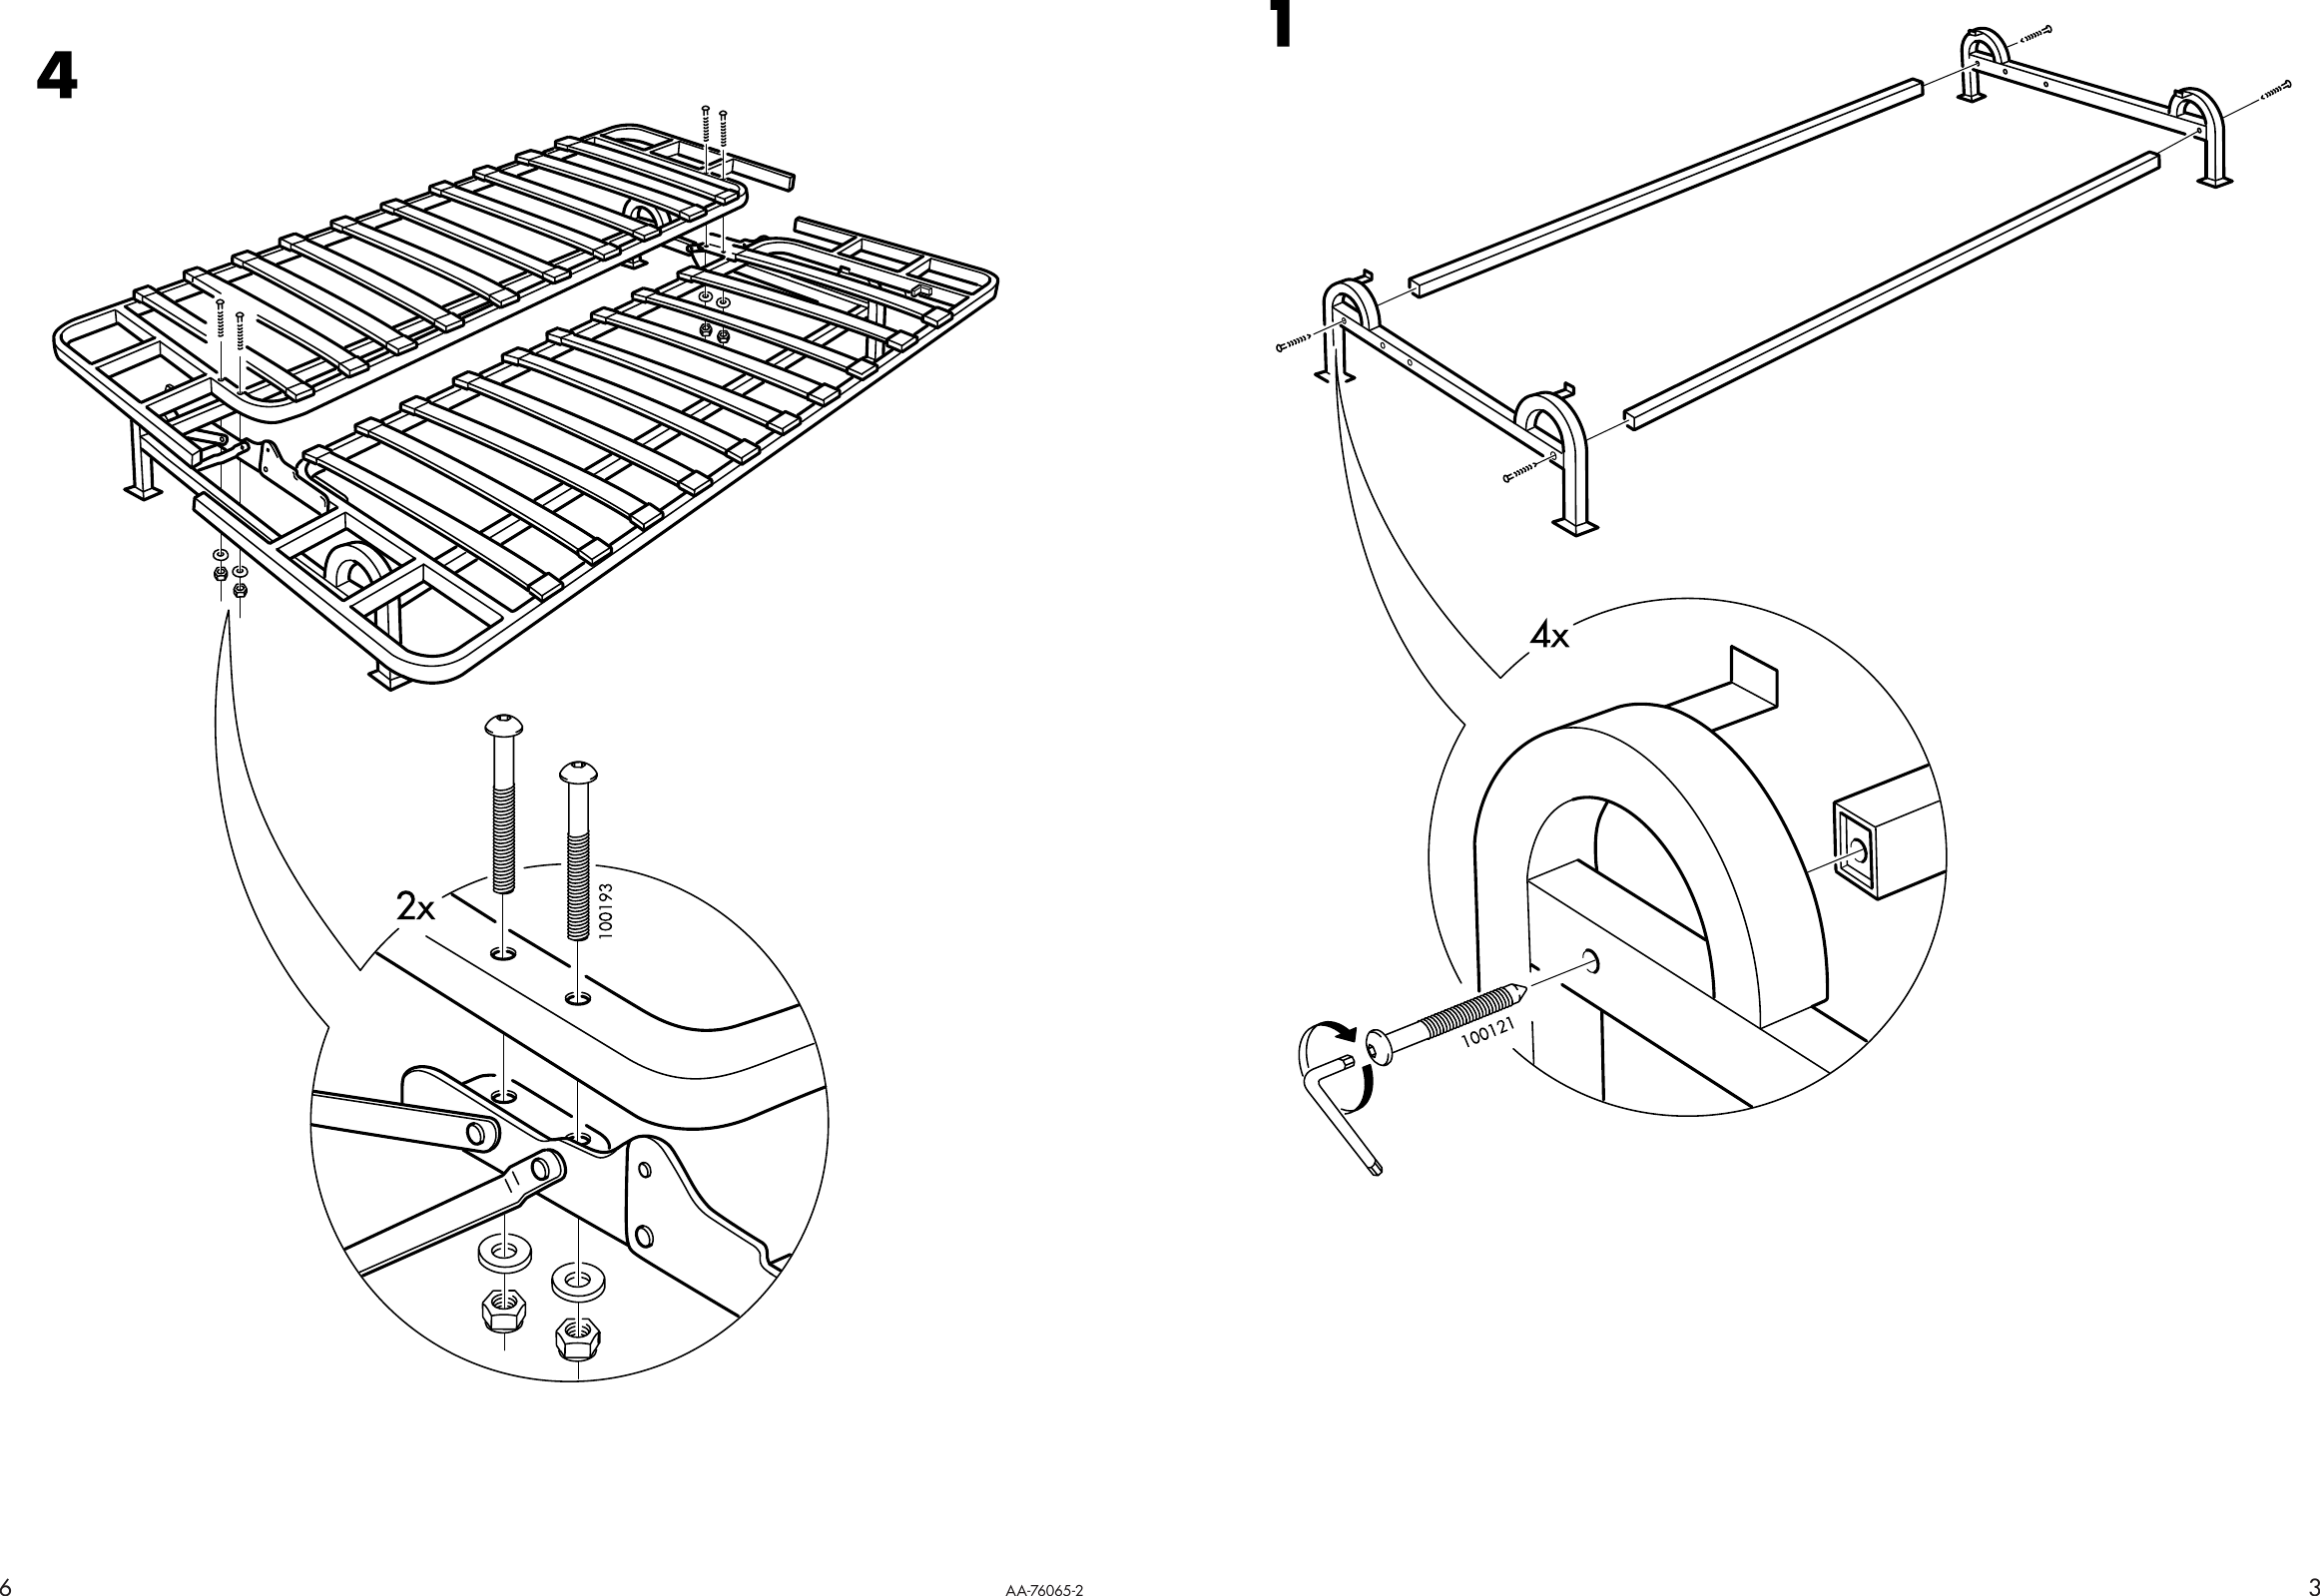 Page 3 of 4 - Ikea Ikea-Exarby-Sofa-Bed-Frame-Assembly-Instruction-3  Ikea-exarby-sofa-bed-frame-assembly-instruction